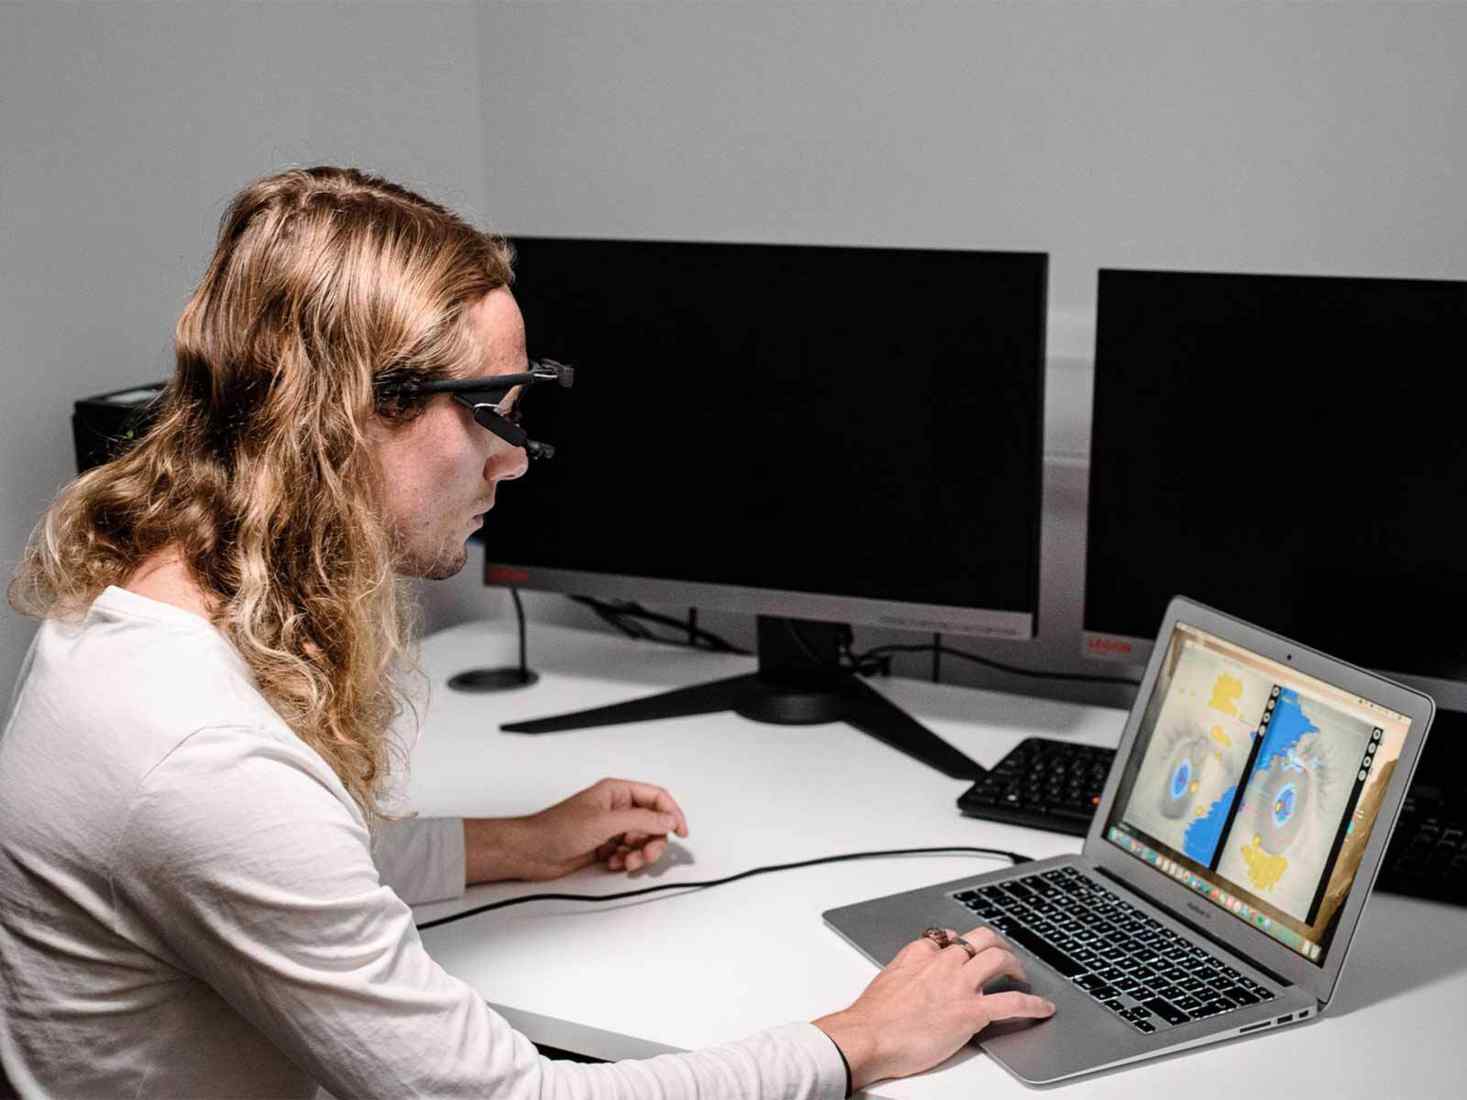  Person sitting in front of a laptop wearing an eye tracker 